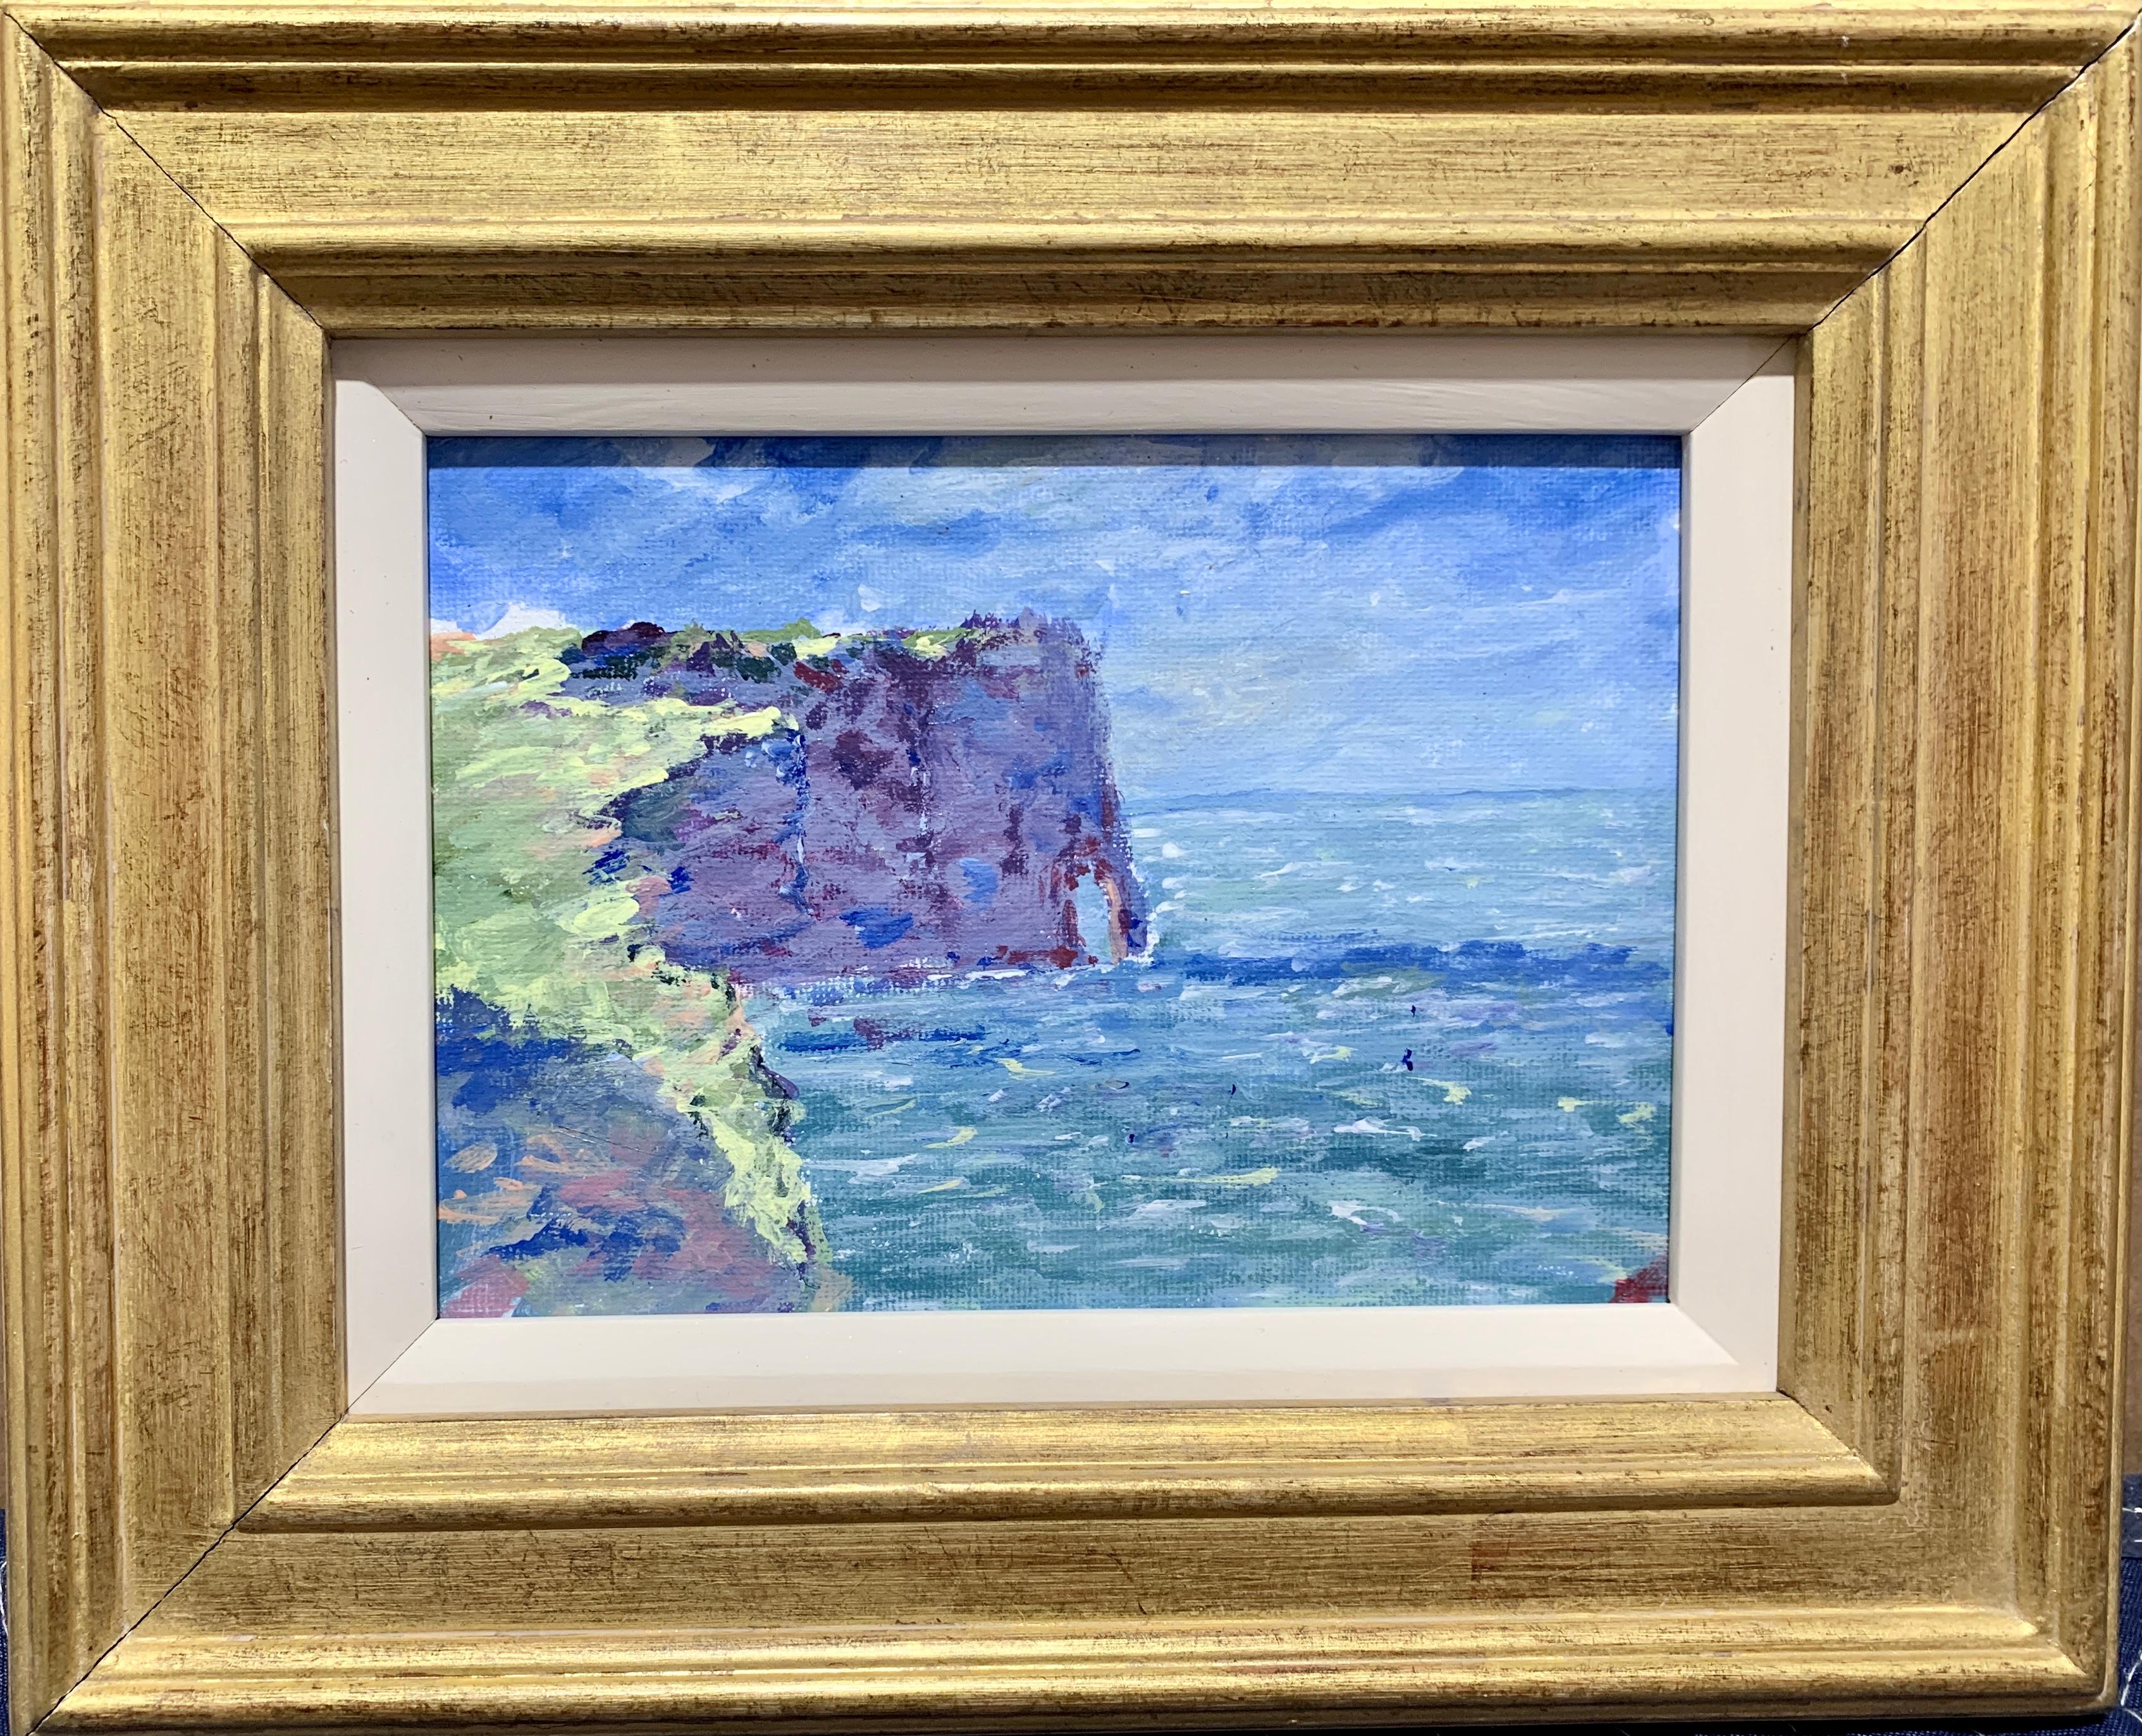 Charles Bertie Hall Landscape Painting - American Impressionist Coastal landscape with cliffs by the sea.